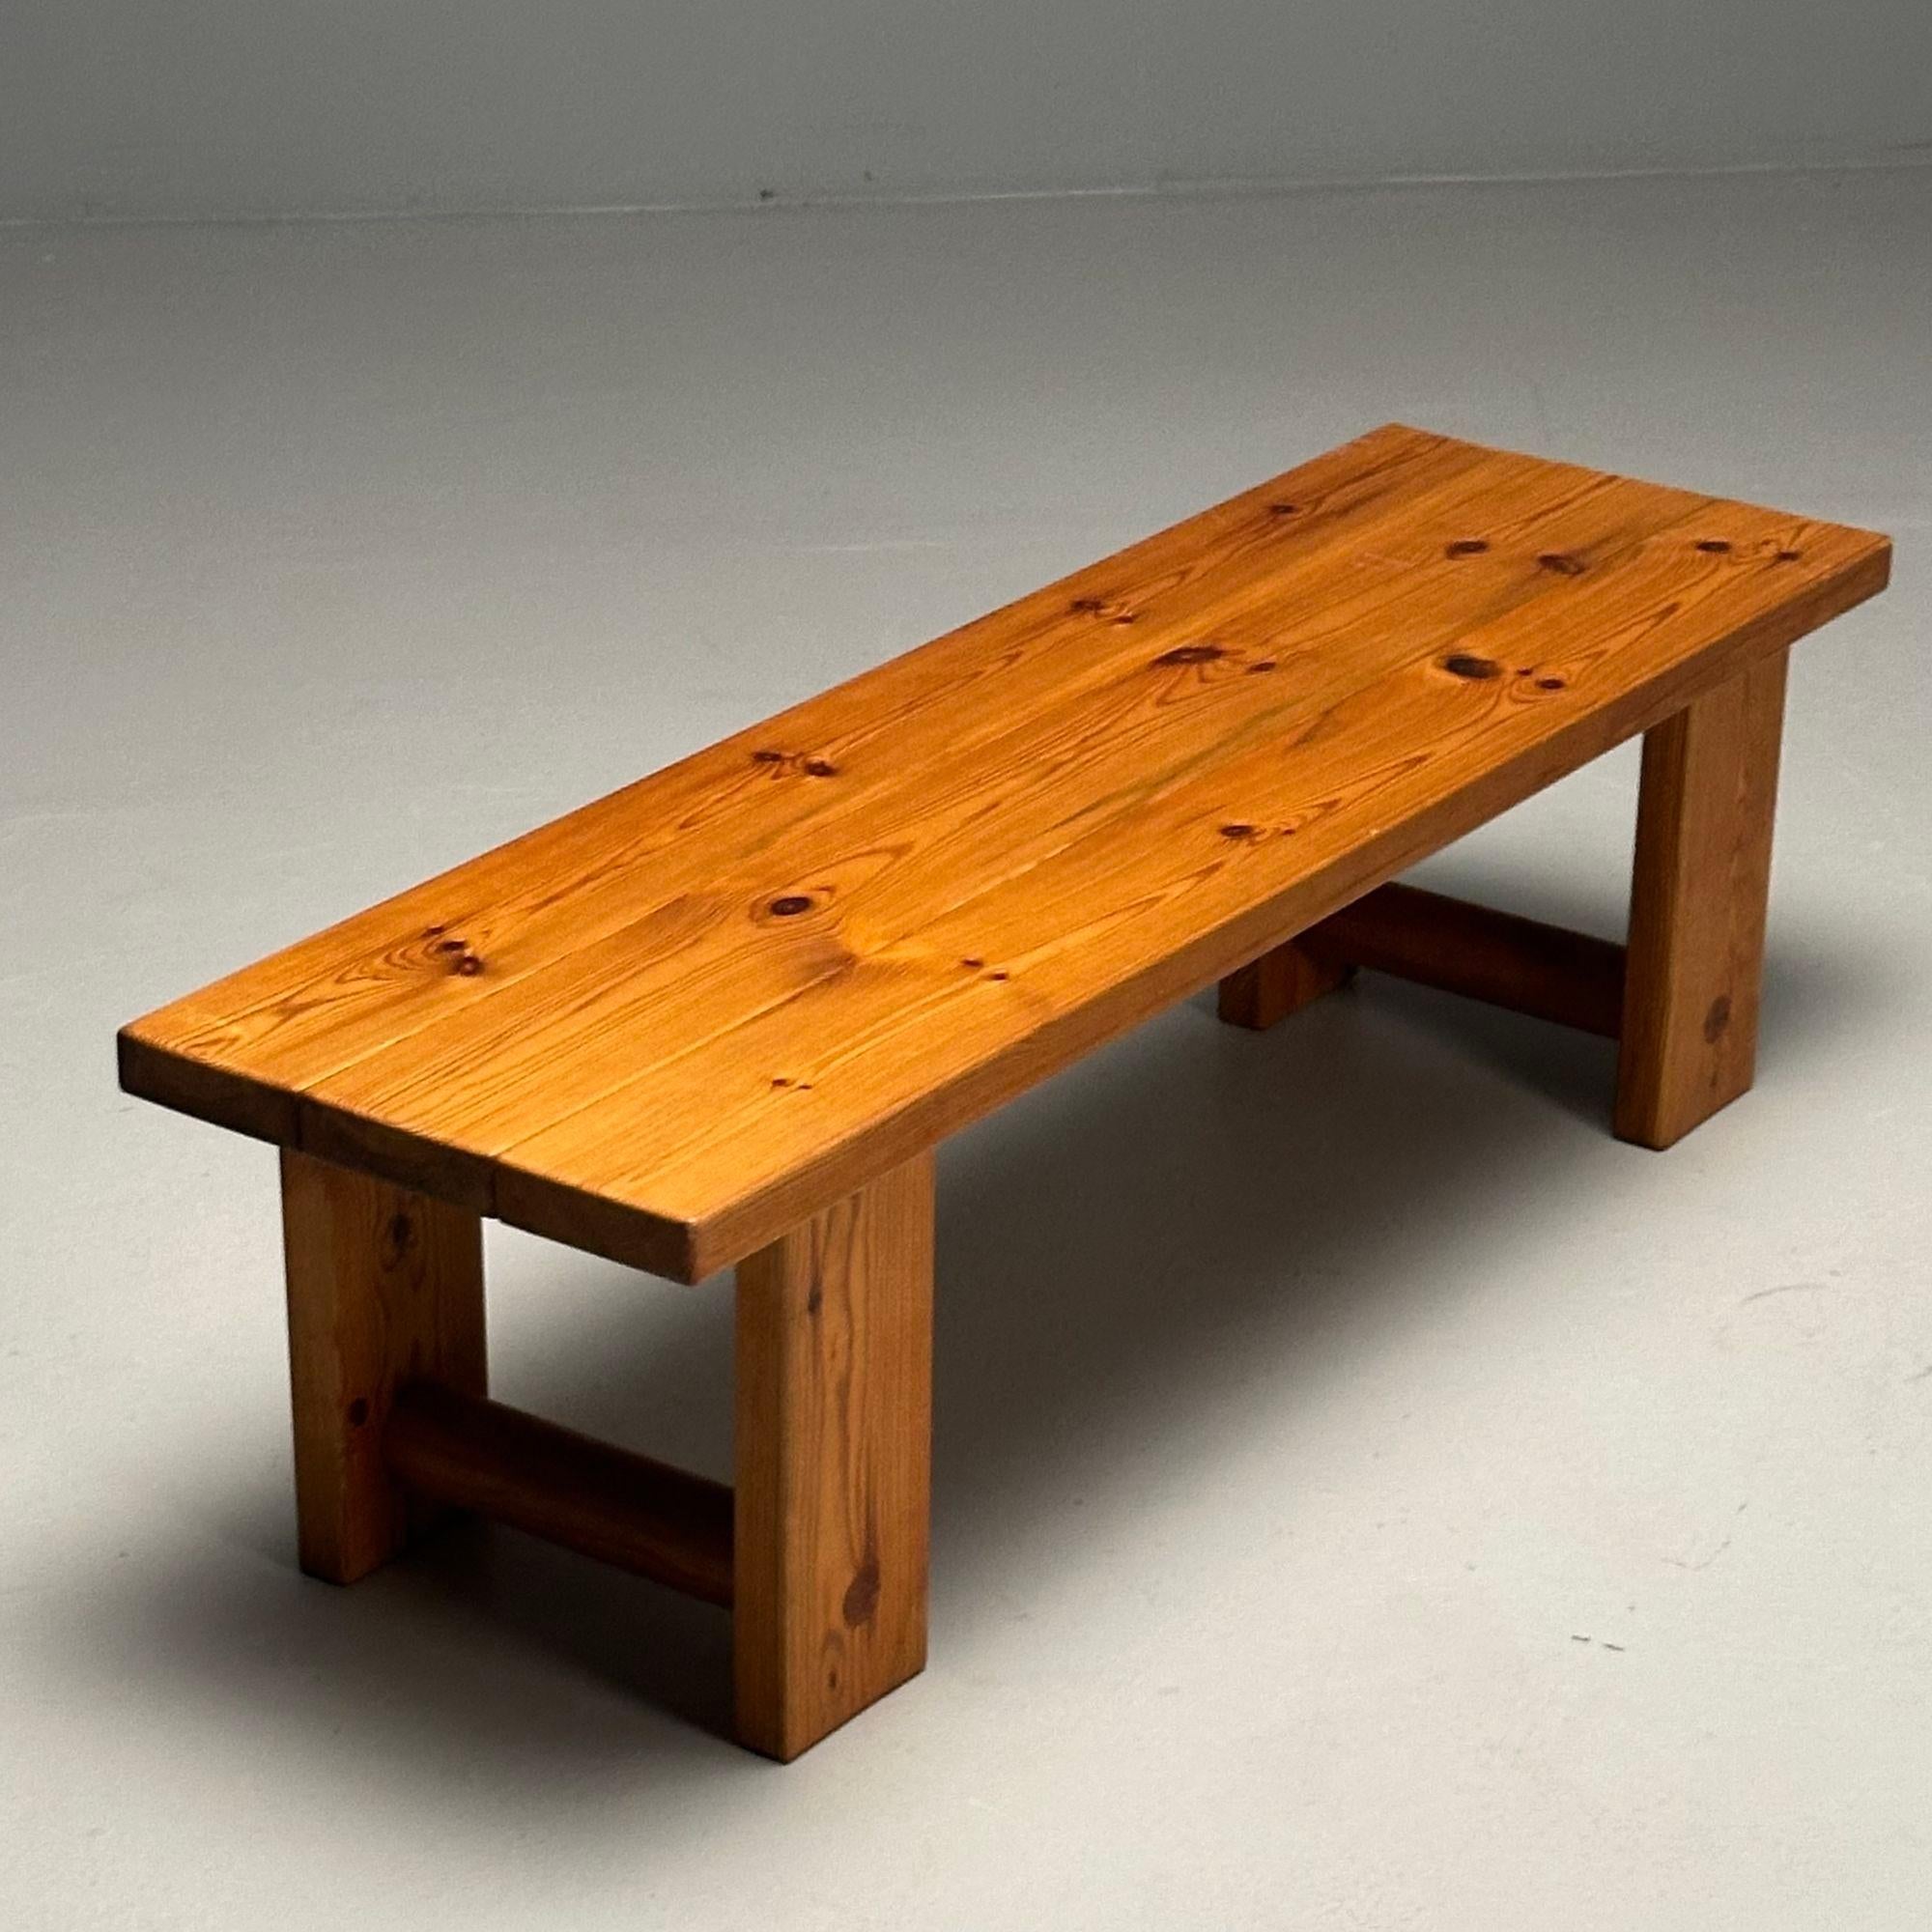 Swedish Designer, Mid-Century Modern, Bench, Pine, Sweden, 1970s

Mid-century modern bench in solid pine designed and produced in Sweden circa 1970s.

Pine
Sweden, 1970s

Height: 16 in Width: 55 in Depth: 16.75 in

EPX